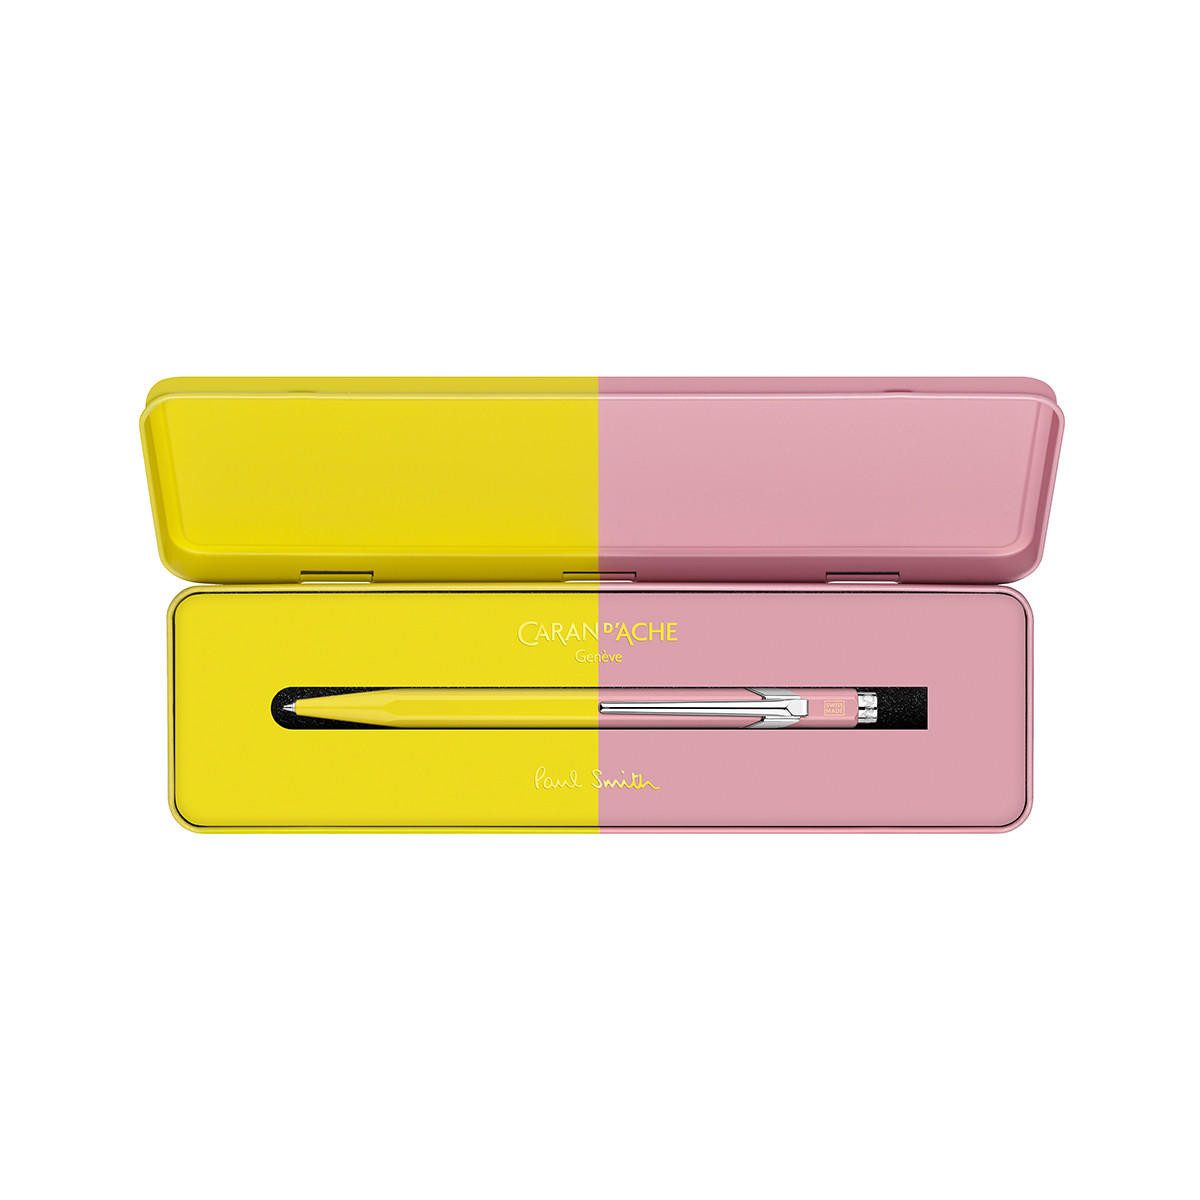 Caran D’ache 849 Ballpoint Pen in Slimpack Paul Smith Edition Chartreuse/Rose